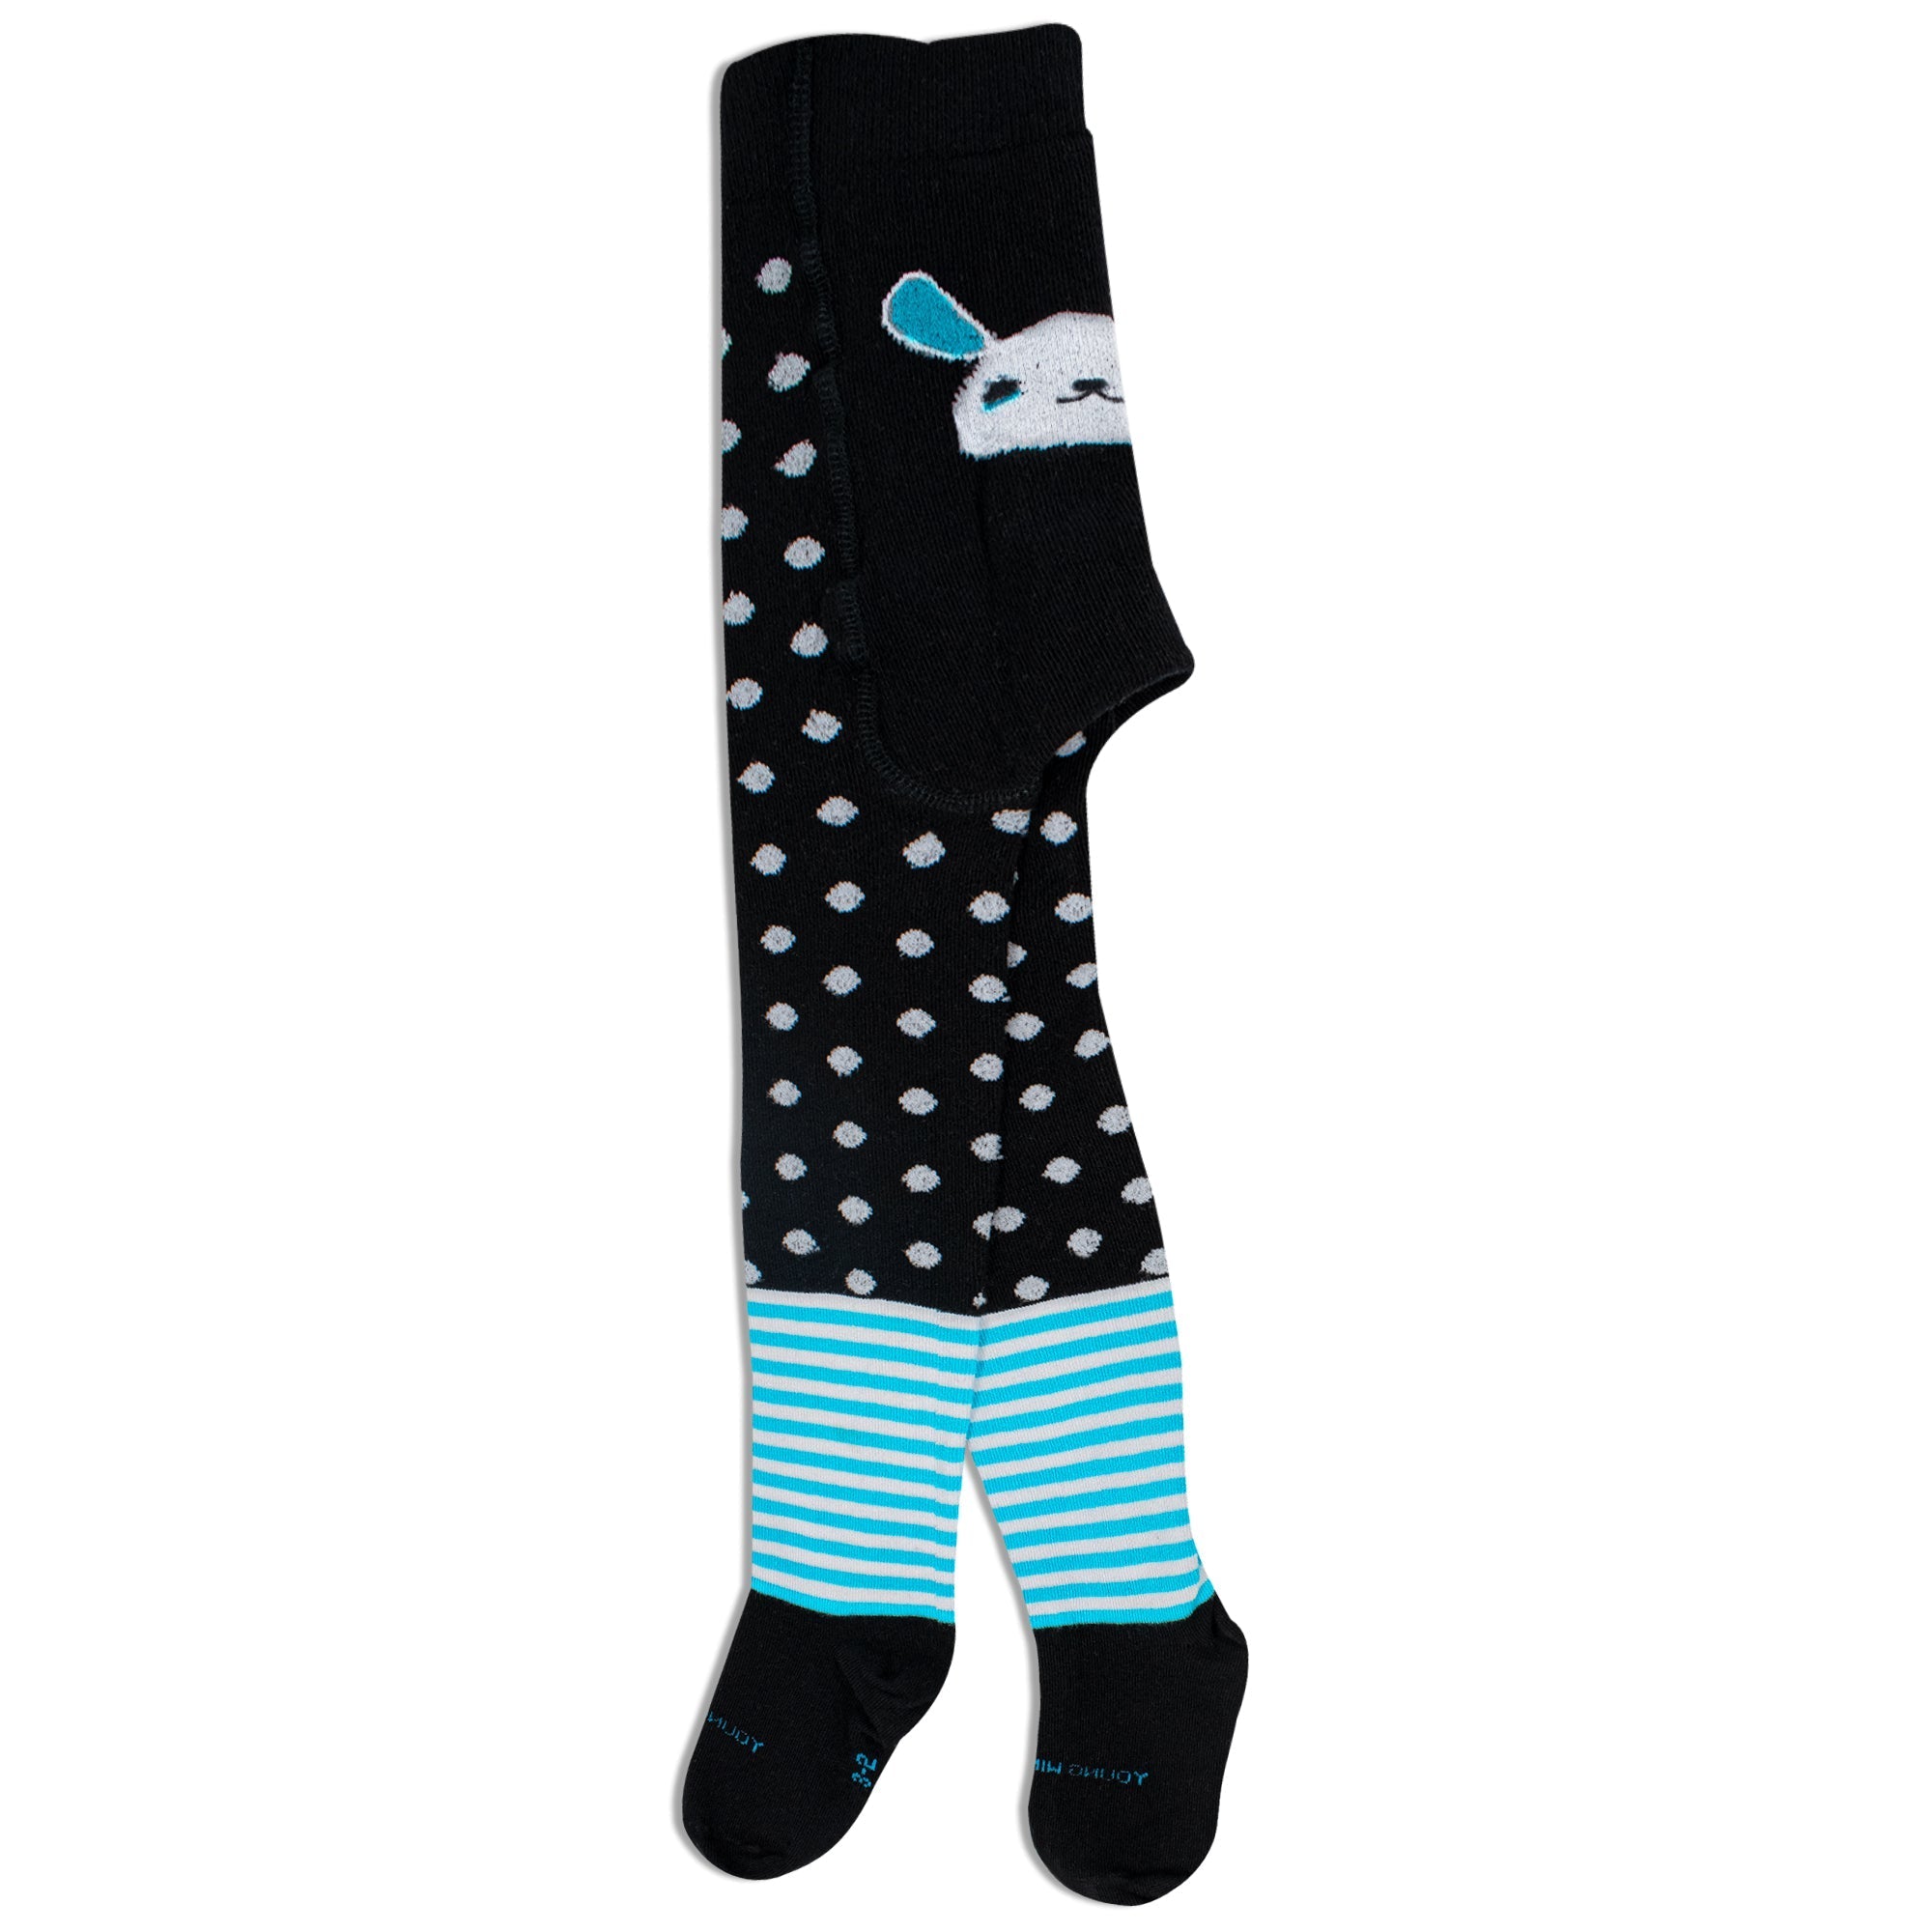 Young Wings Antibacterial Kids Circle & Stripe Design Tights - DT 1006 - Pack of 1